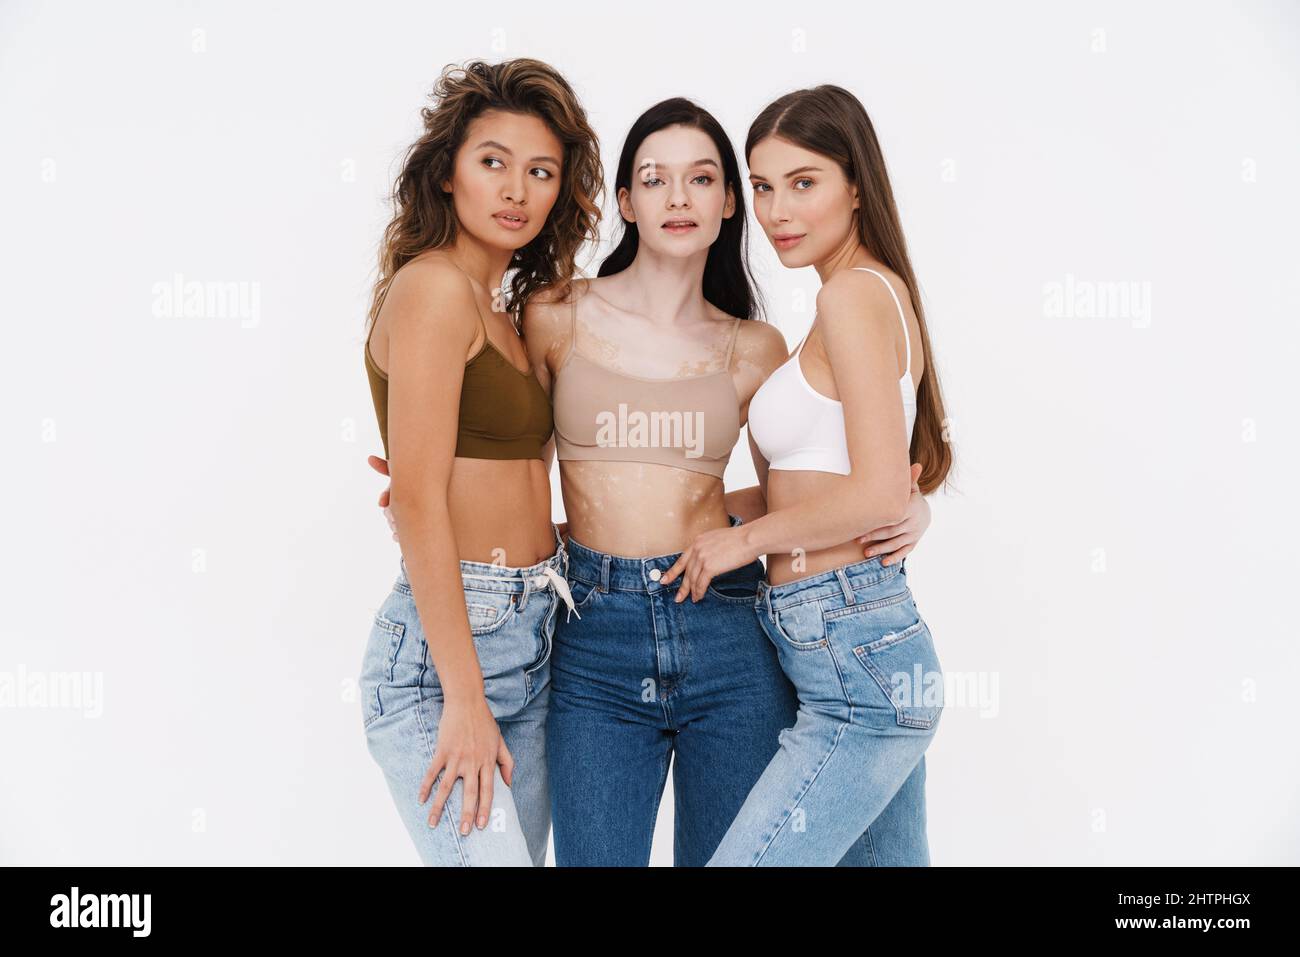 Cropped view of multiethnic women in modern and colorful bras and